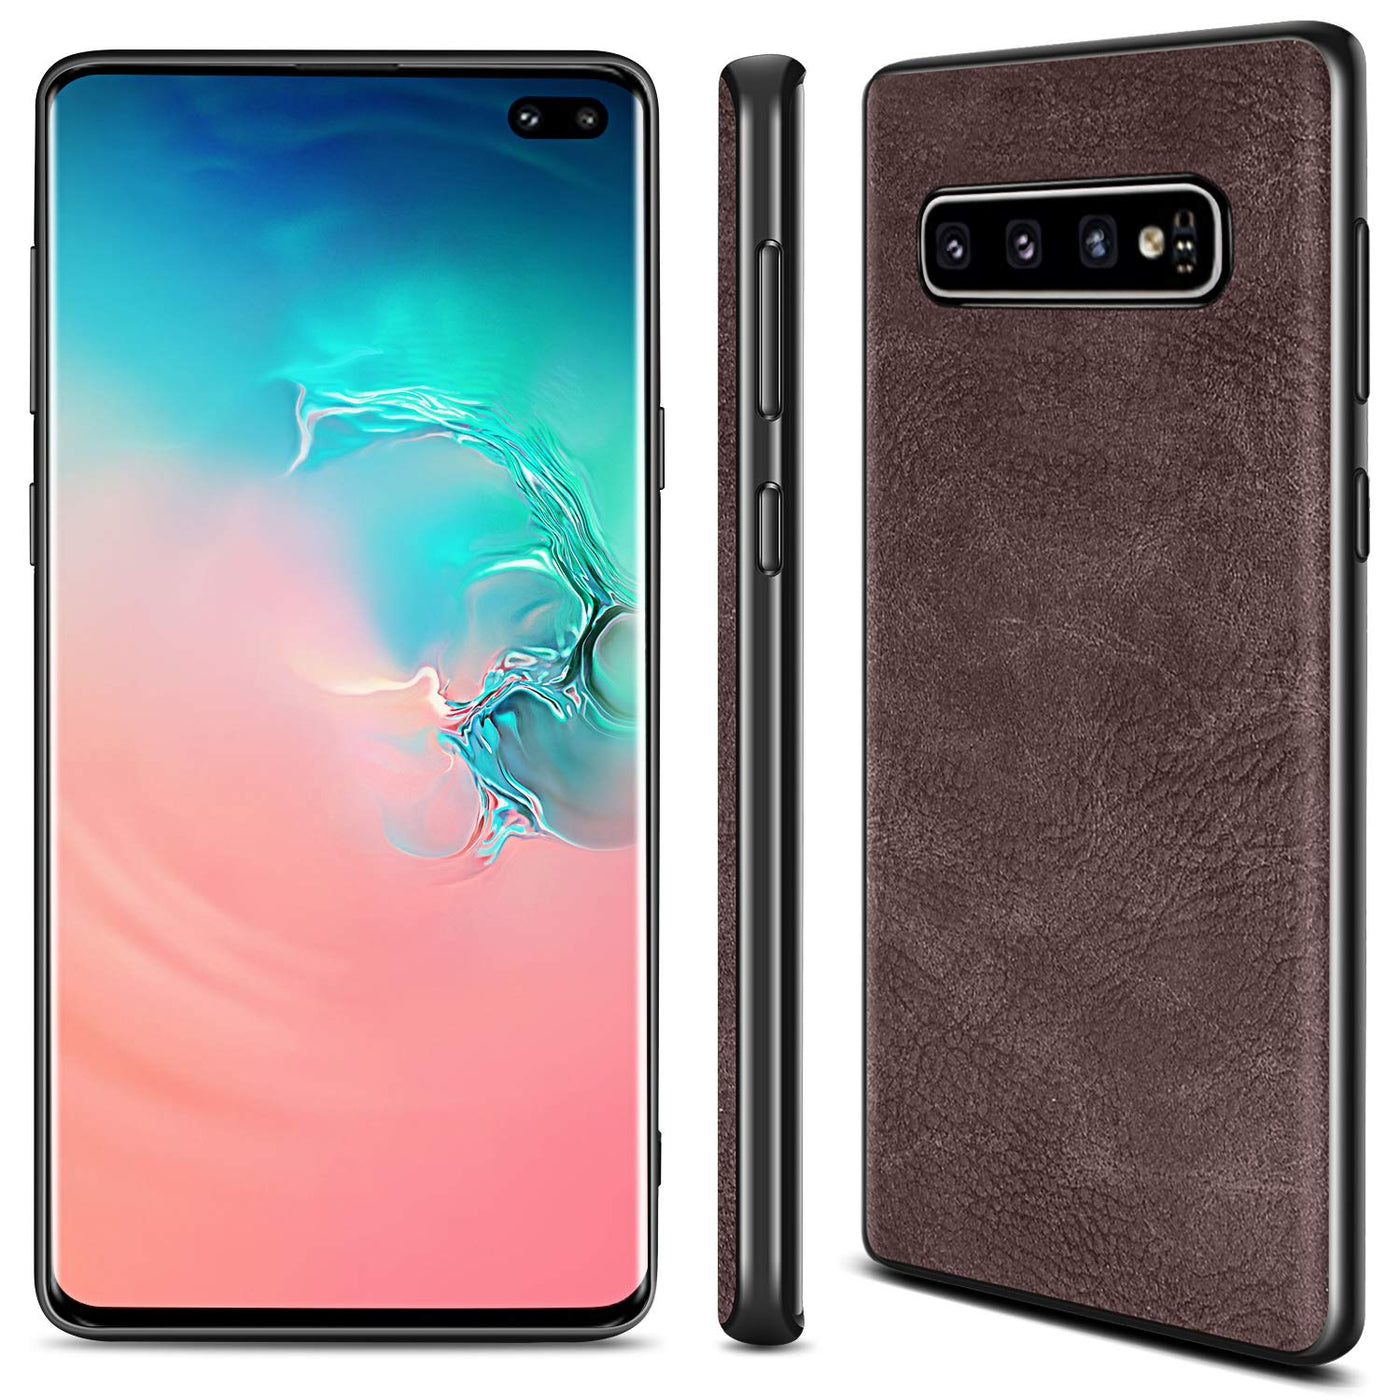 Samsung Galaxy S10 Plus coffee color leather back case